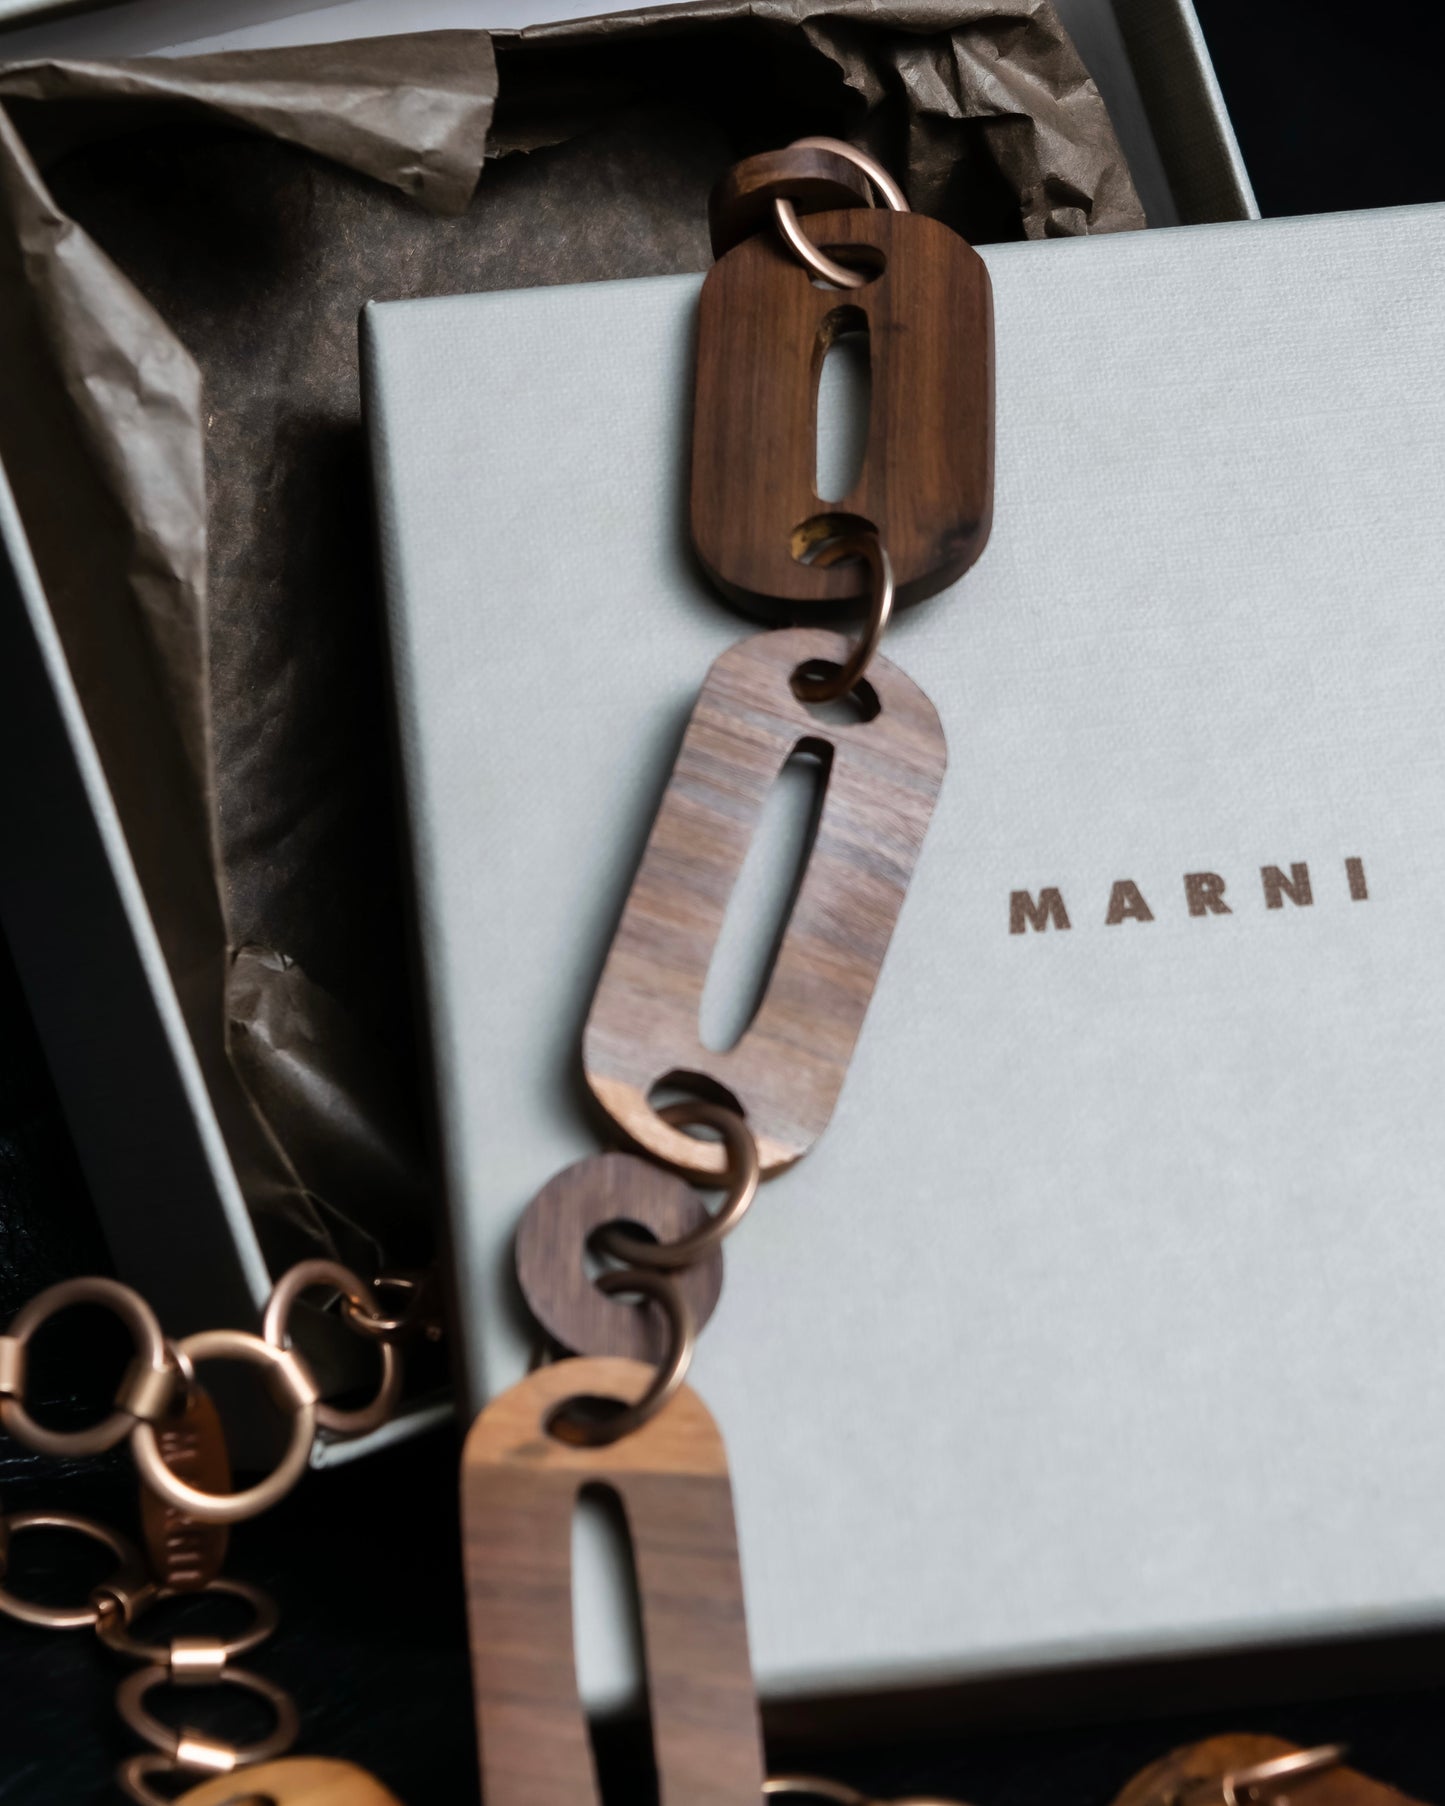 "MARNI" Large tree and chain combination necklace